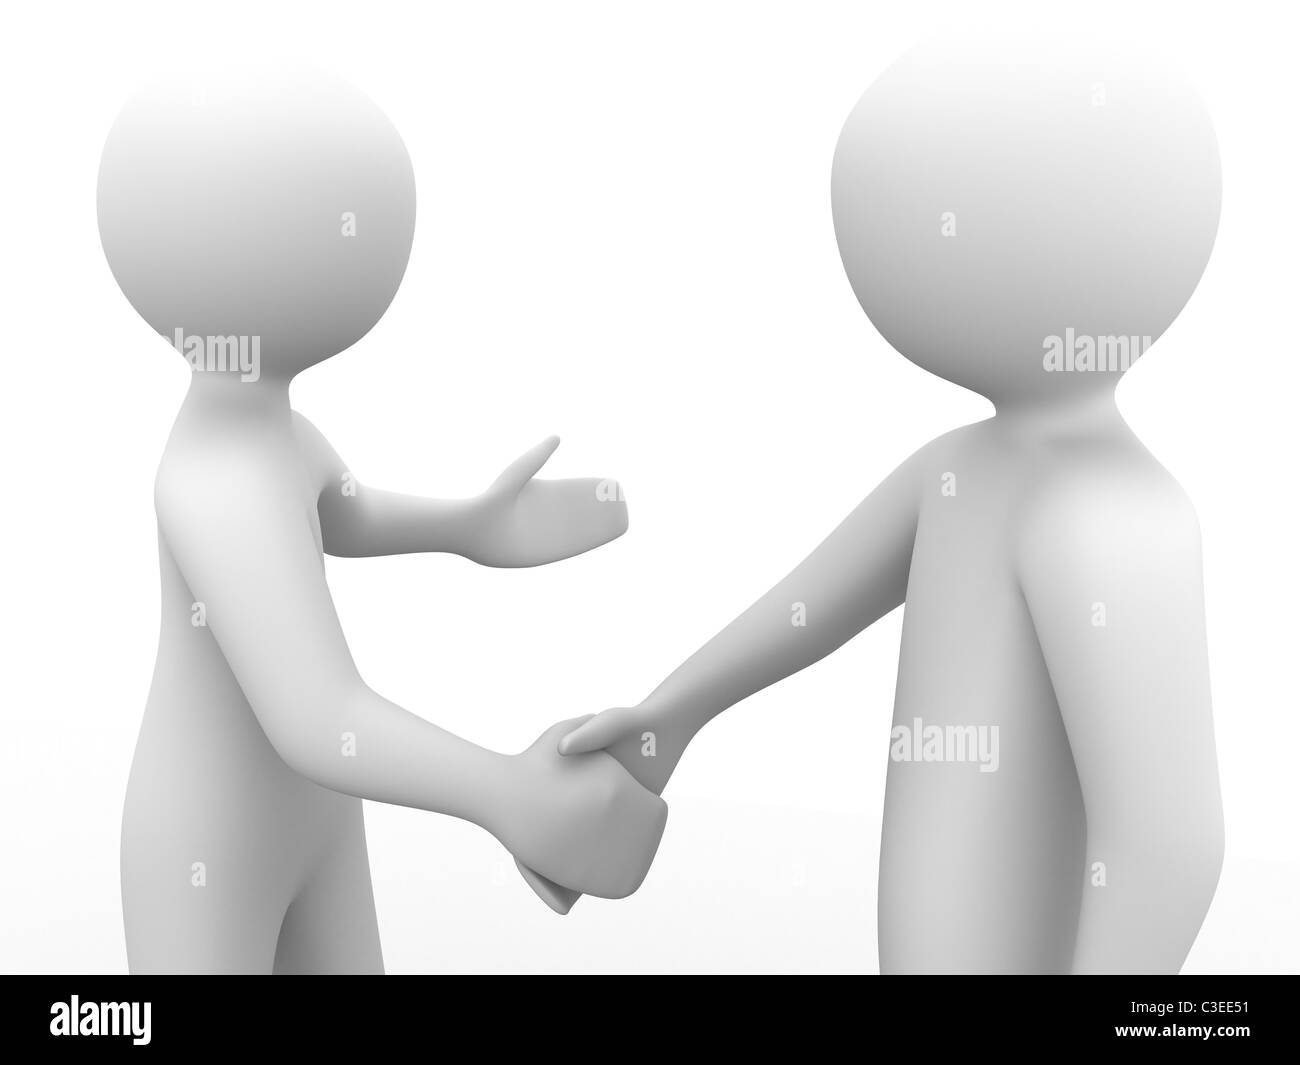 11,401 Two People Waving Images, Stock Photos, 3D objects